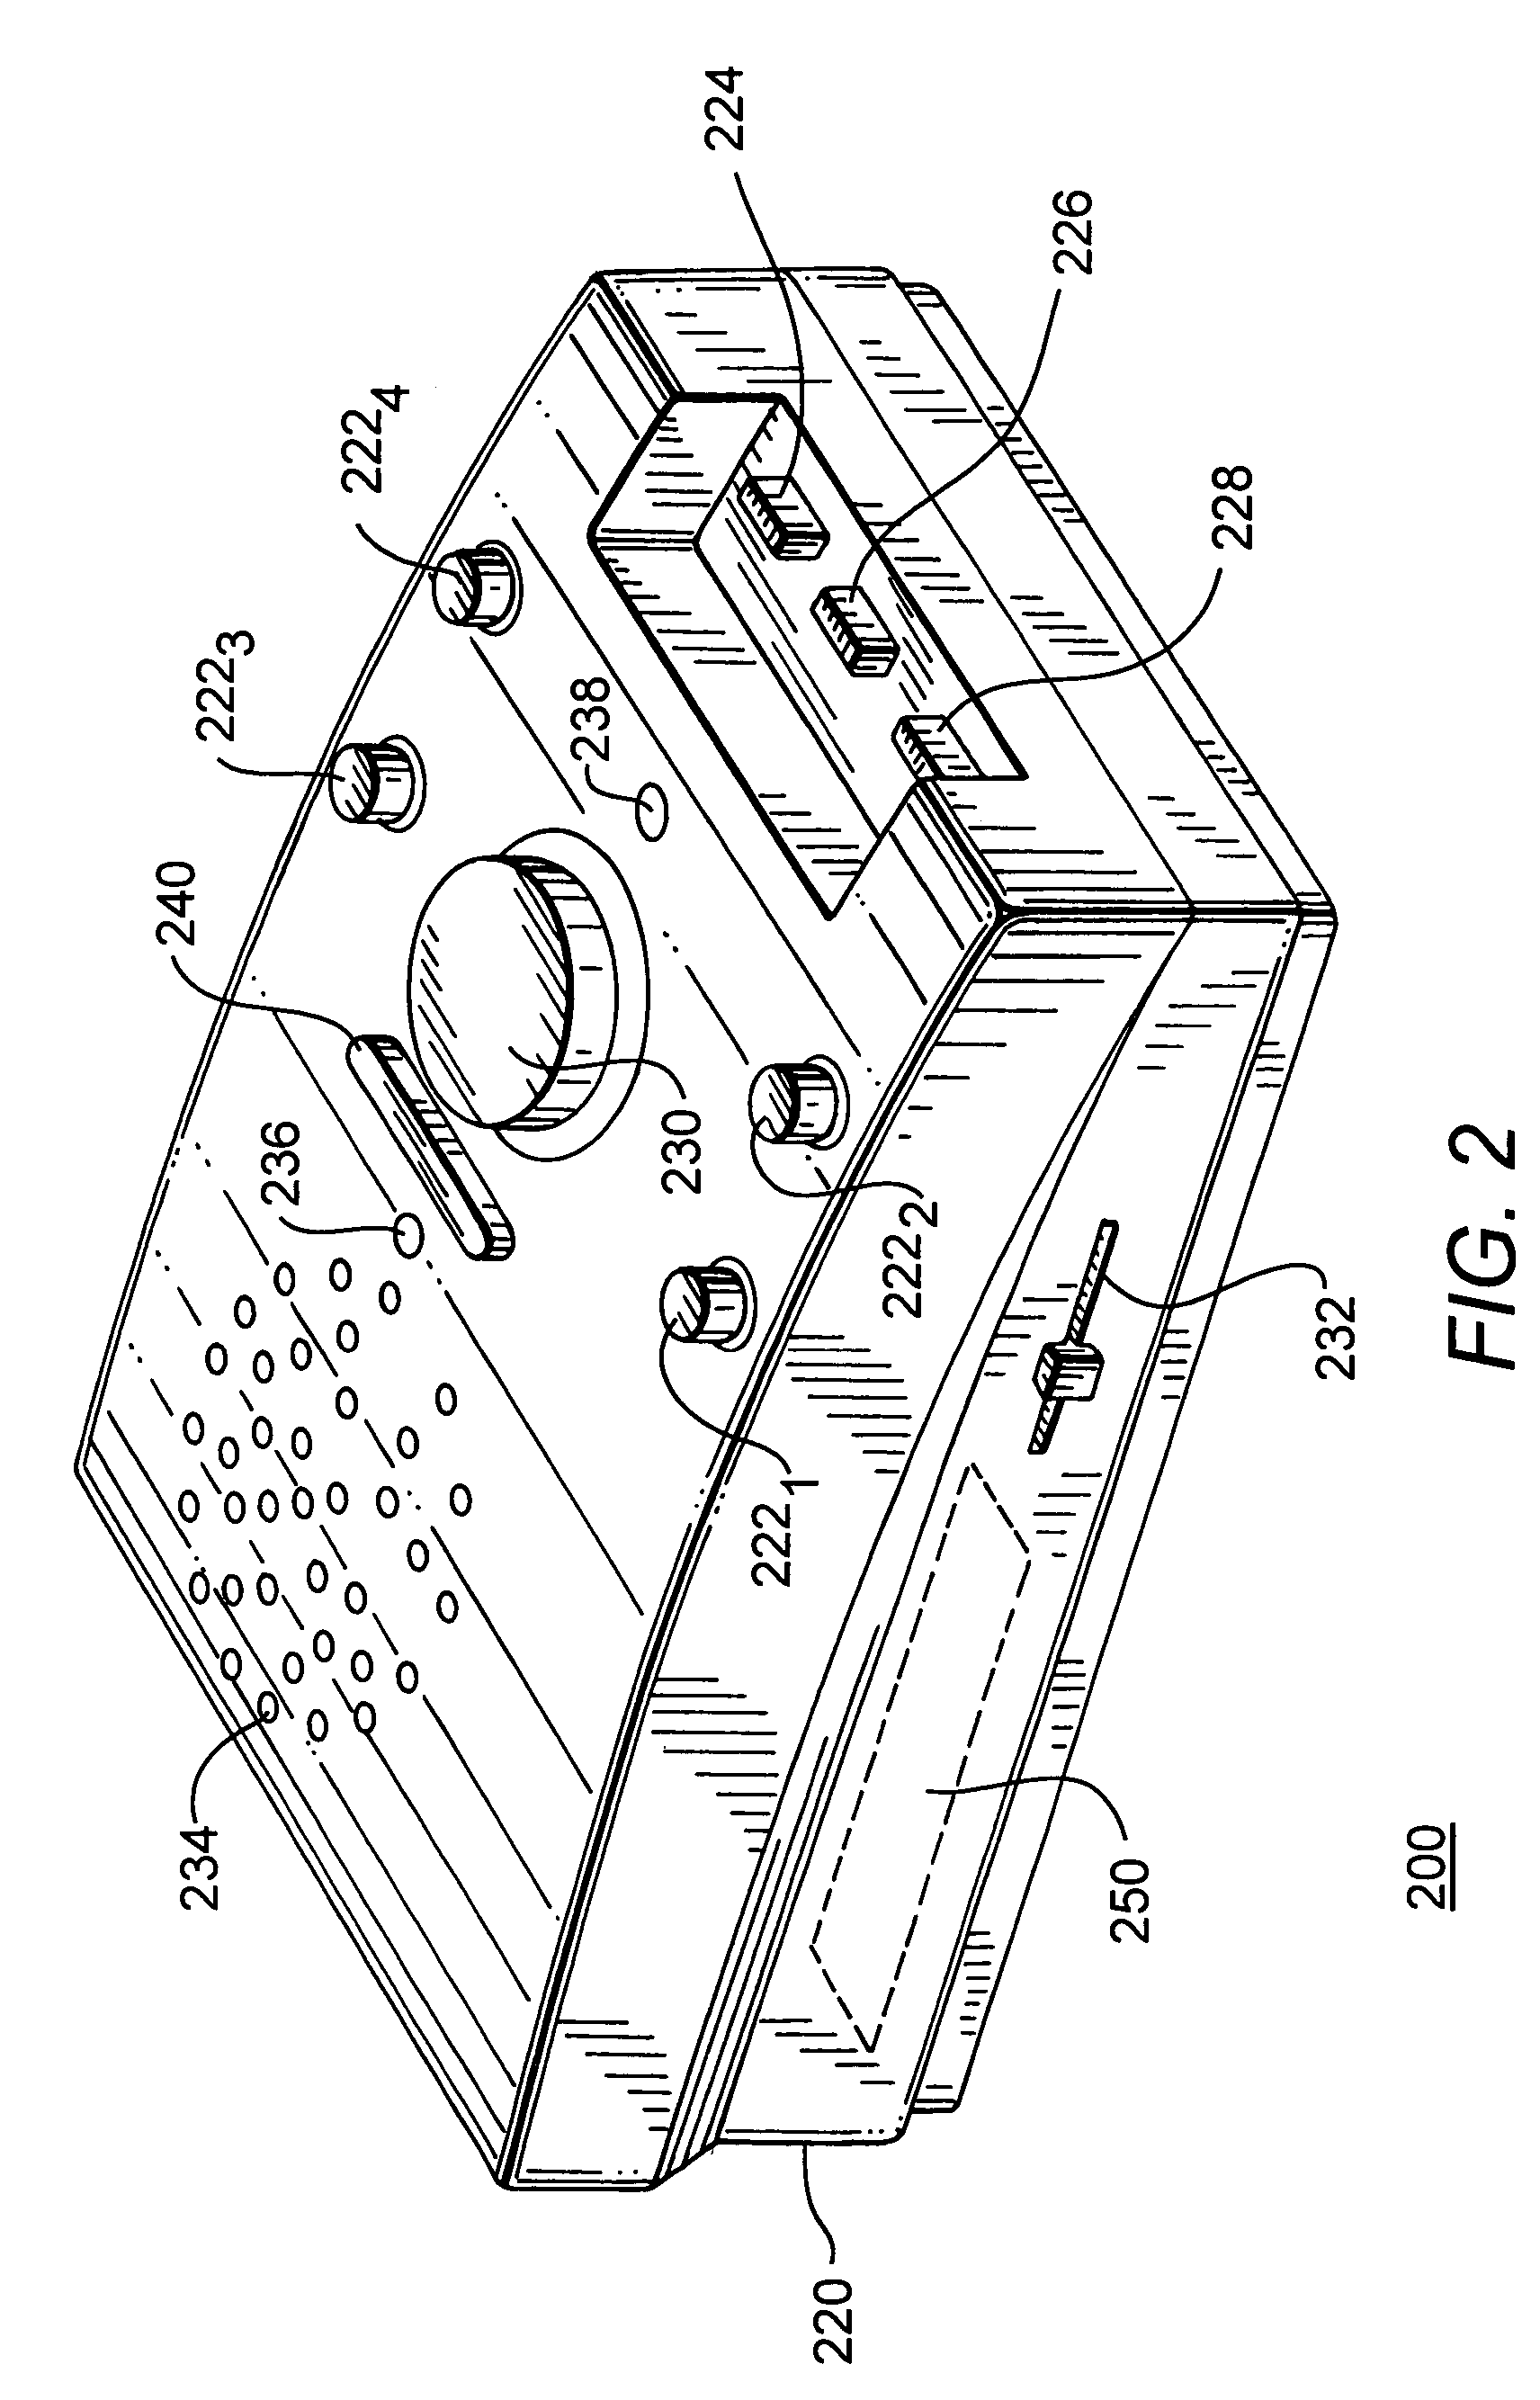 Automated programmable medication reminder and dispensing system